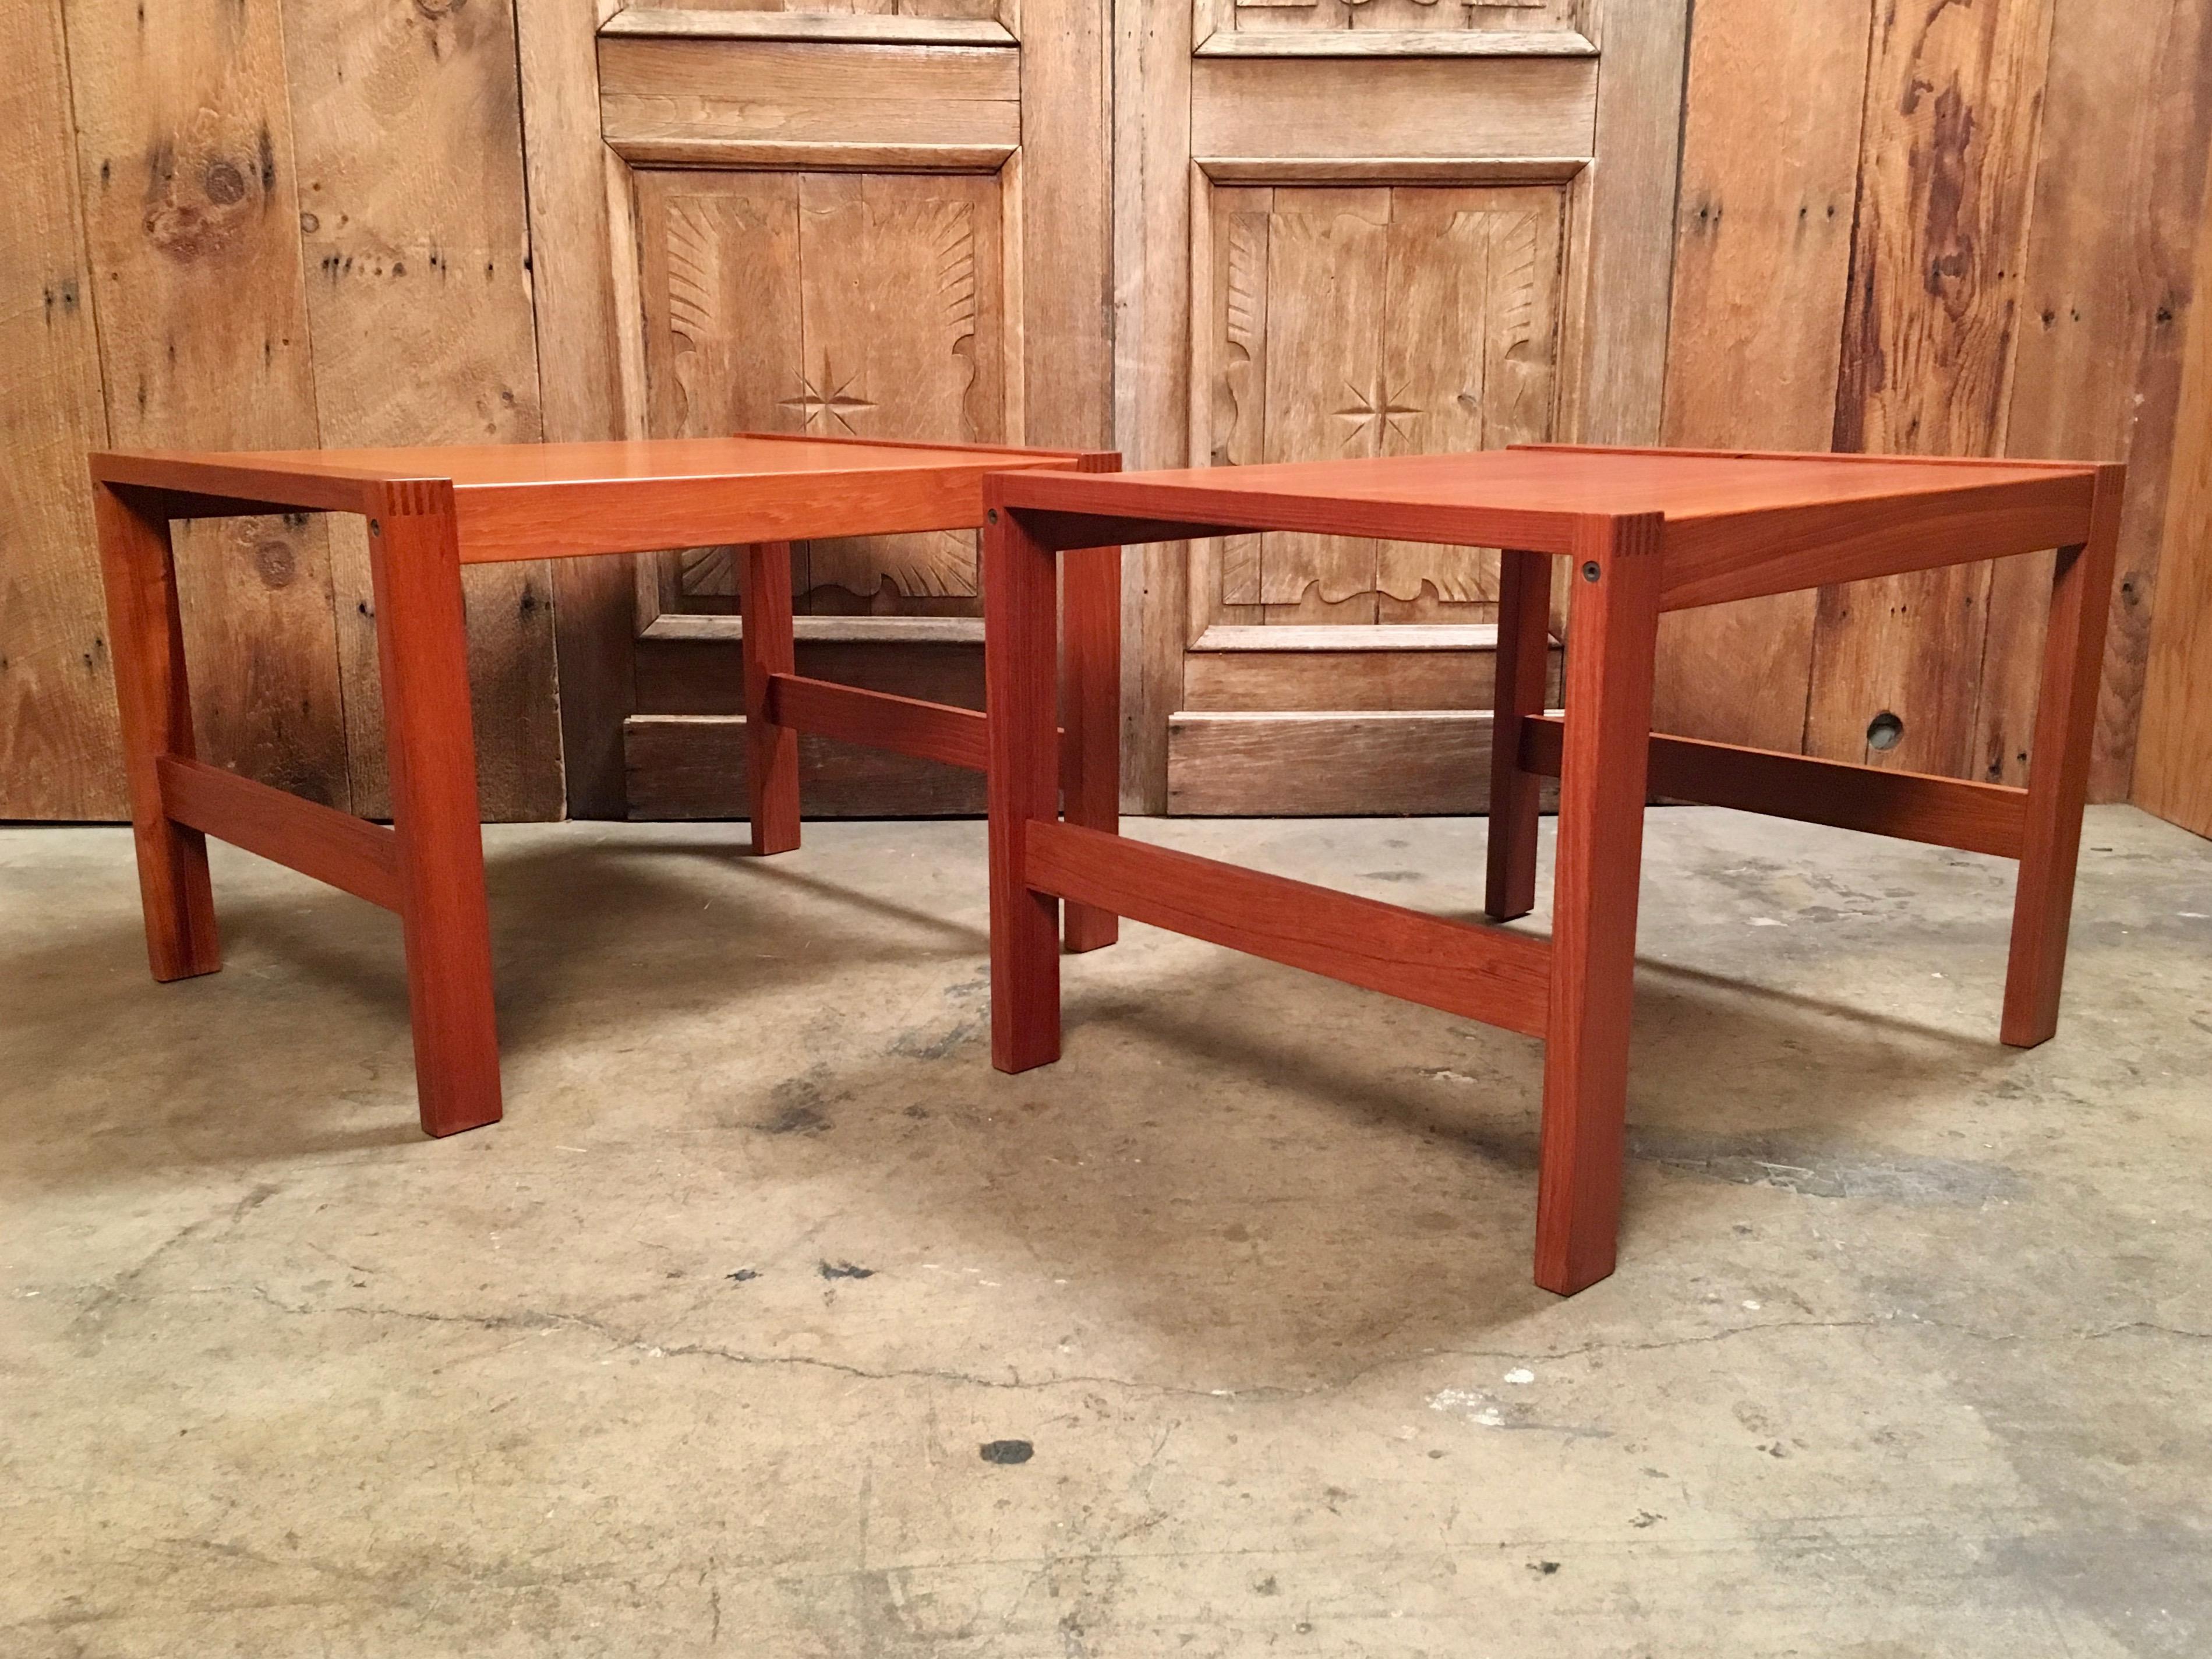 Vintage pair of teak handcrafted end tables with box joint corners.